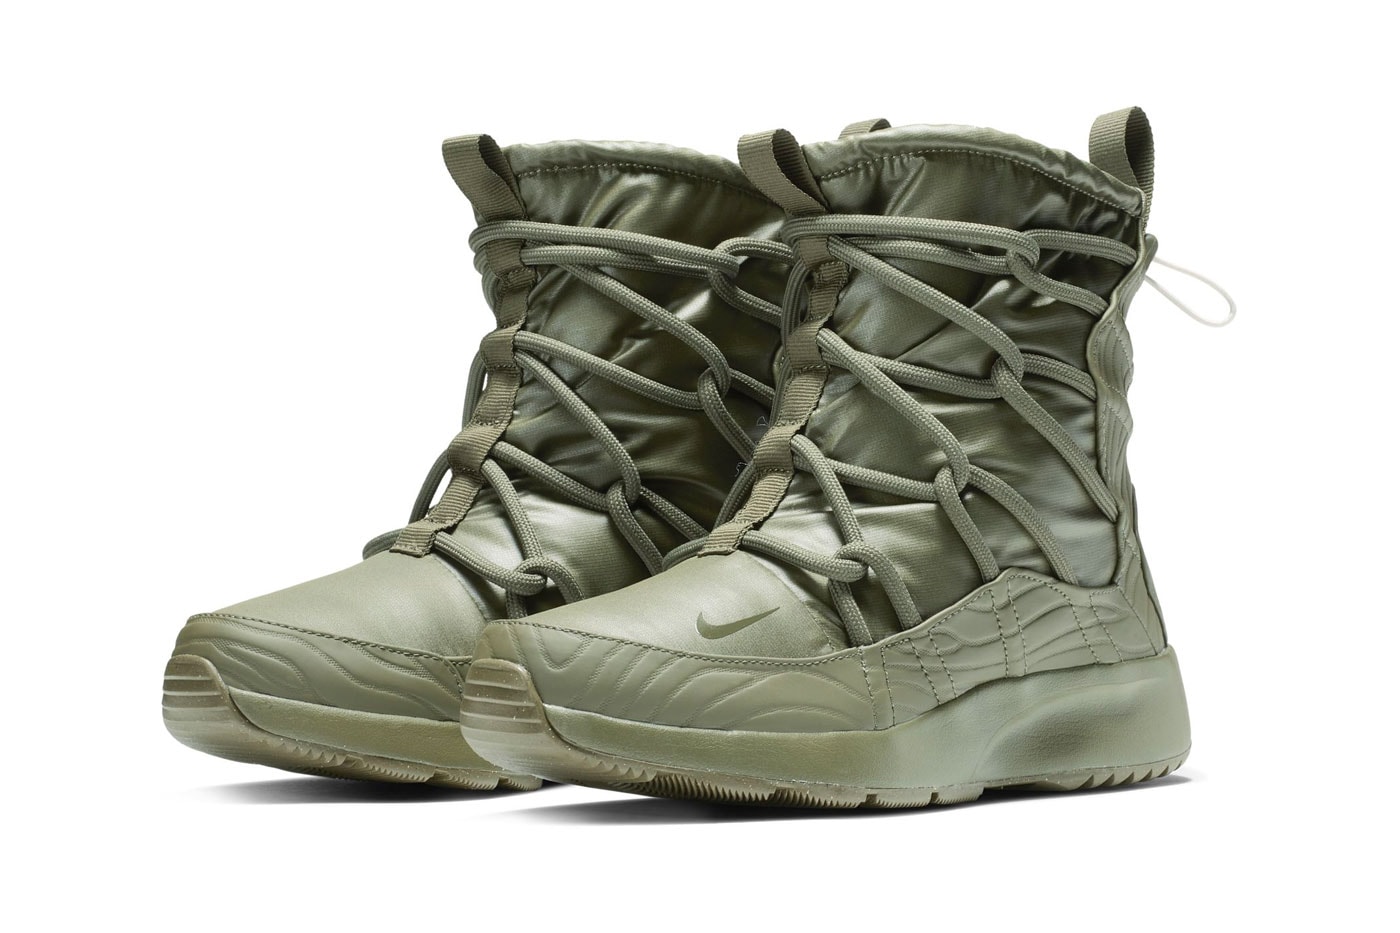 Nike Tanjun High Rise Boot New Colorways Fall 2018 olive maroon black white release date info price sneakers winter